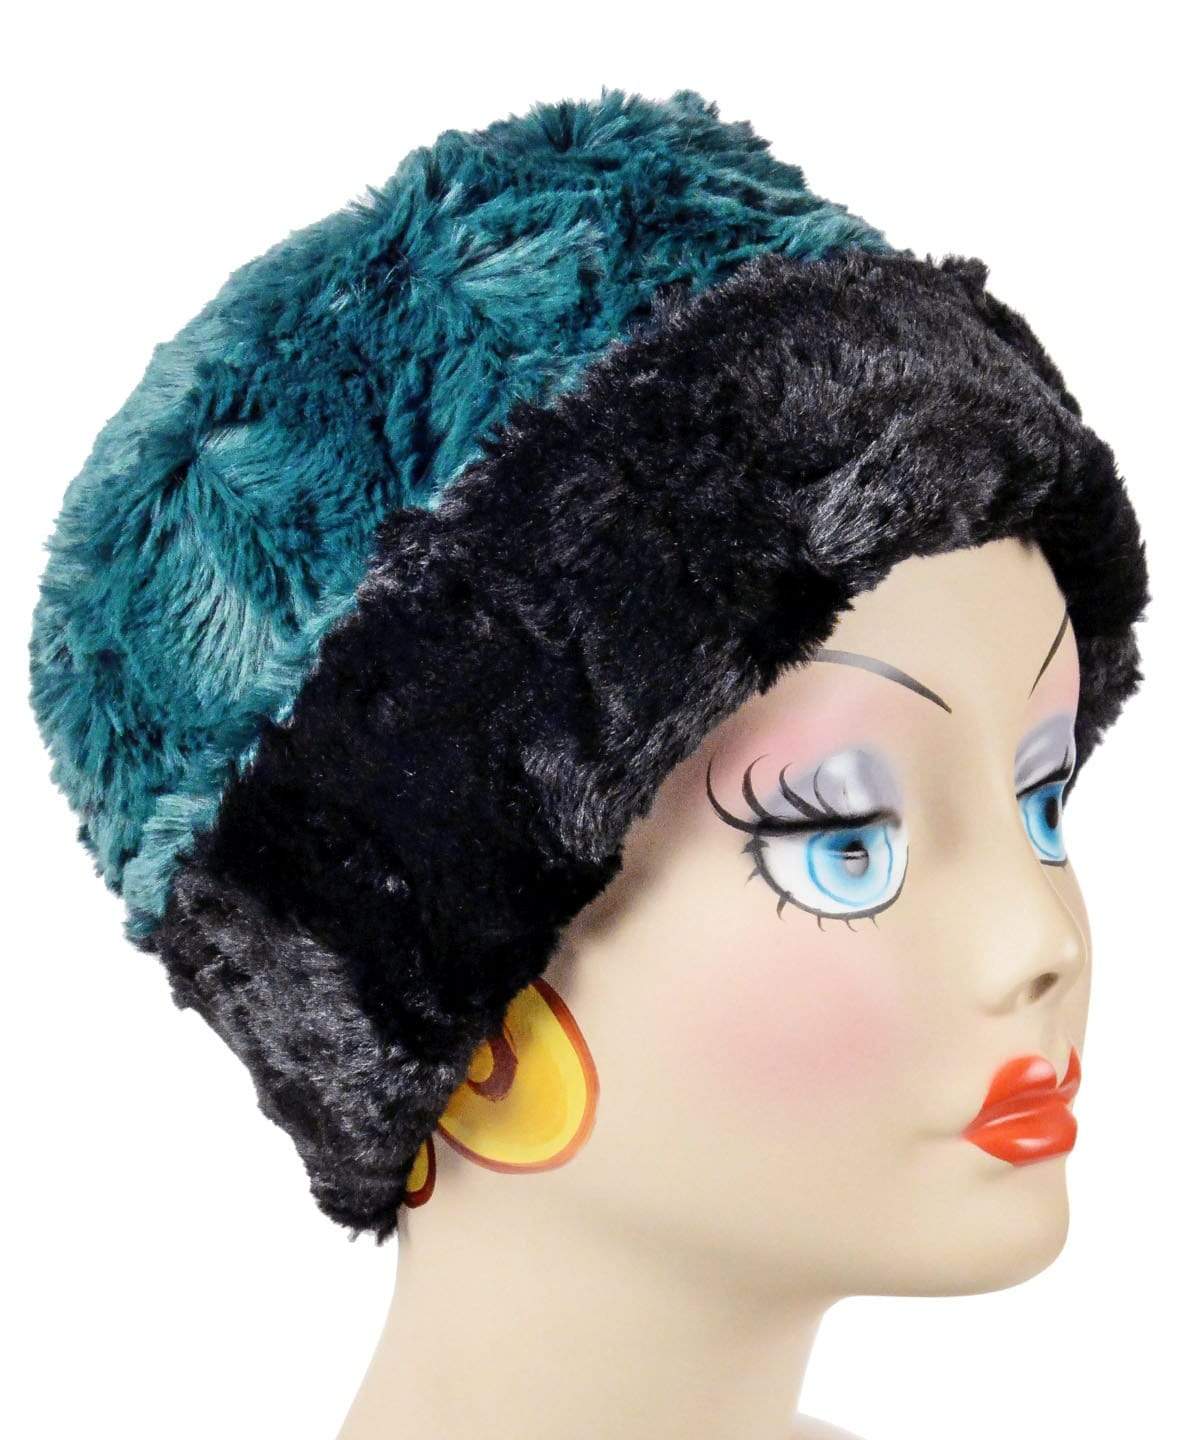 woman wearing a Two Tone Cuffed Pillbox, Reversible shown in Peacock Pond with Cuddly Black Faux Fur by Pandemonium Millinery. Handmade in Seattle, WA USA.